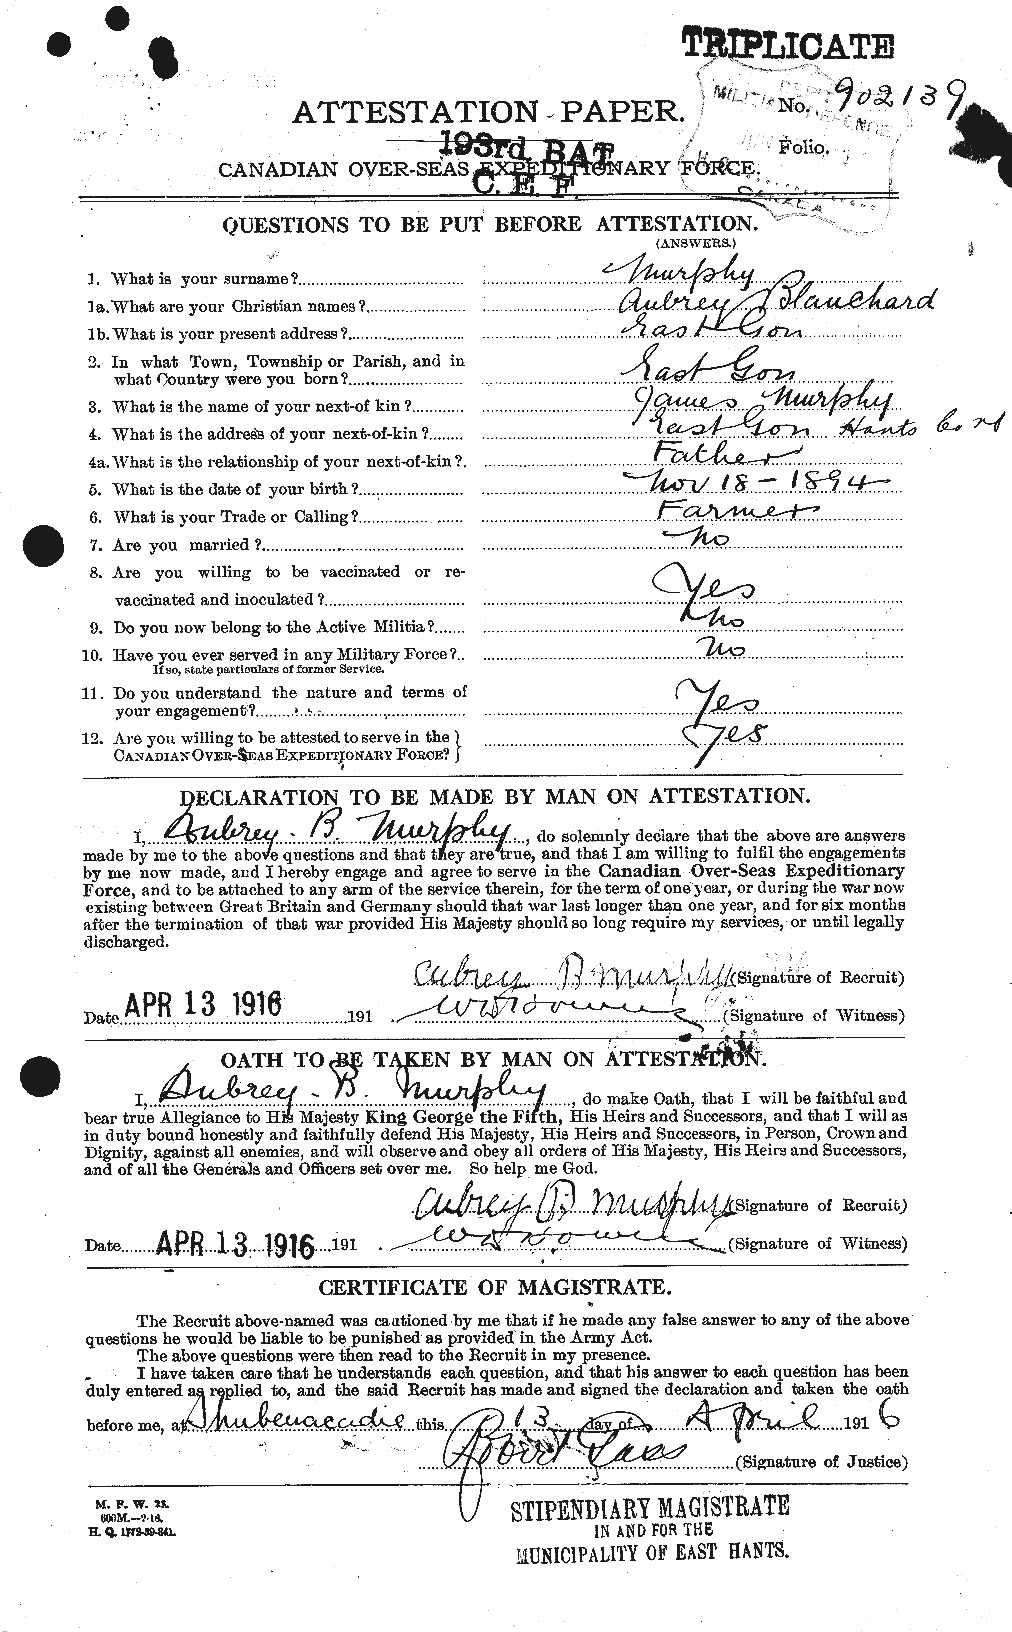 Personnel Records of the First World War - CEF 512685a